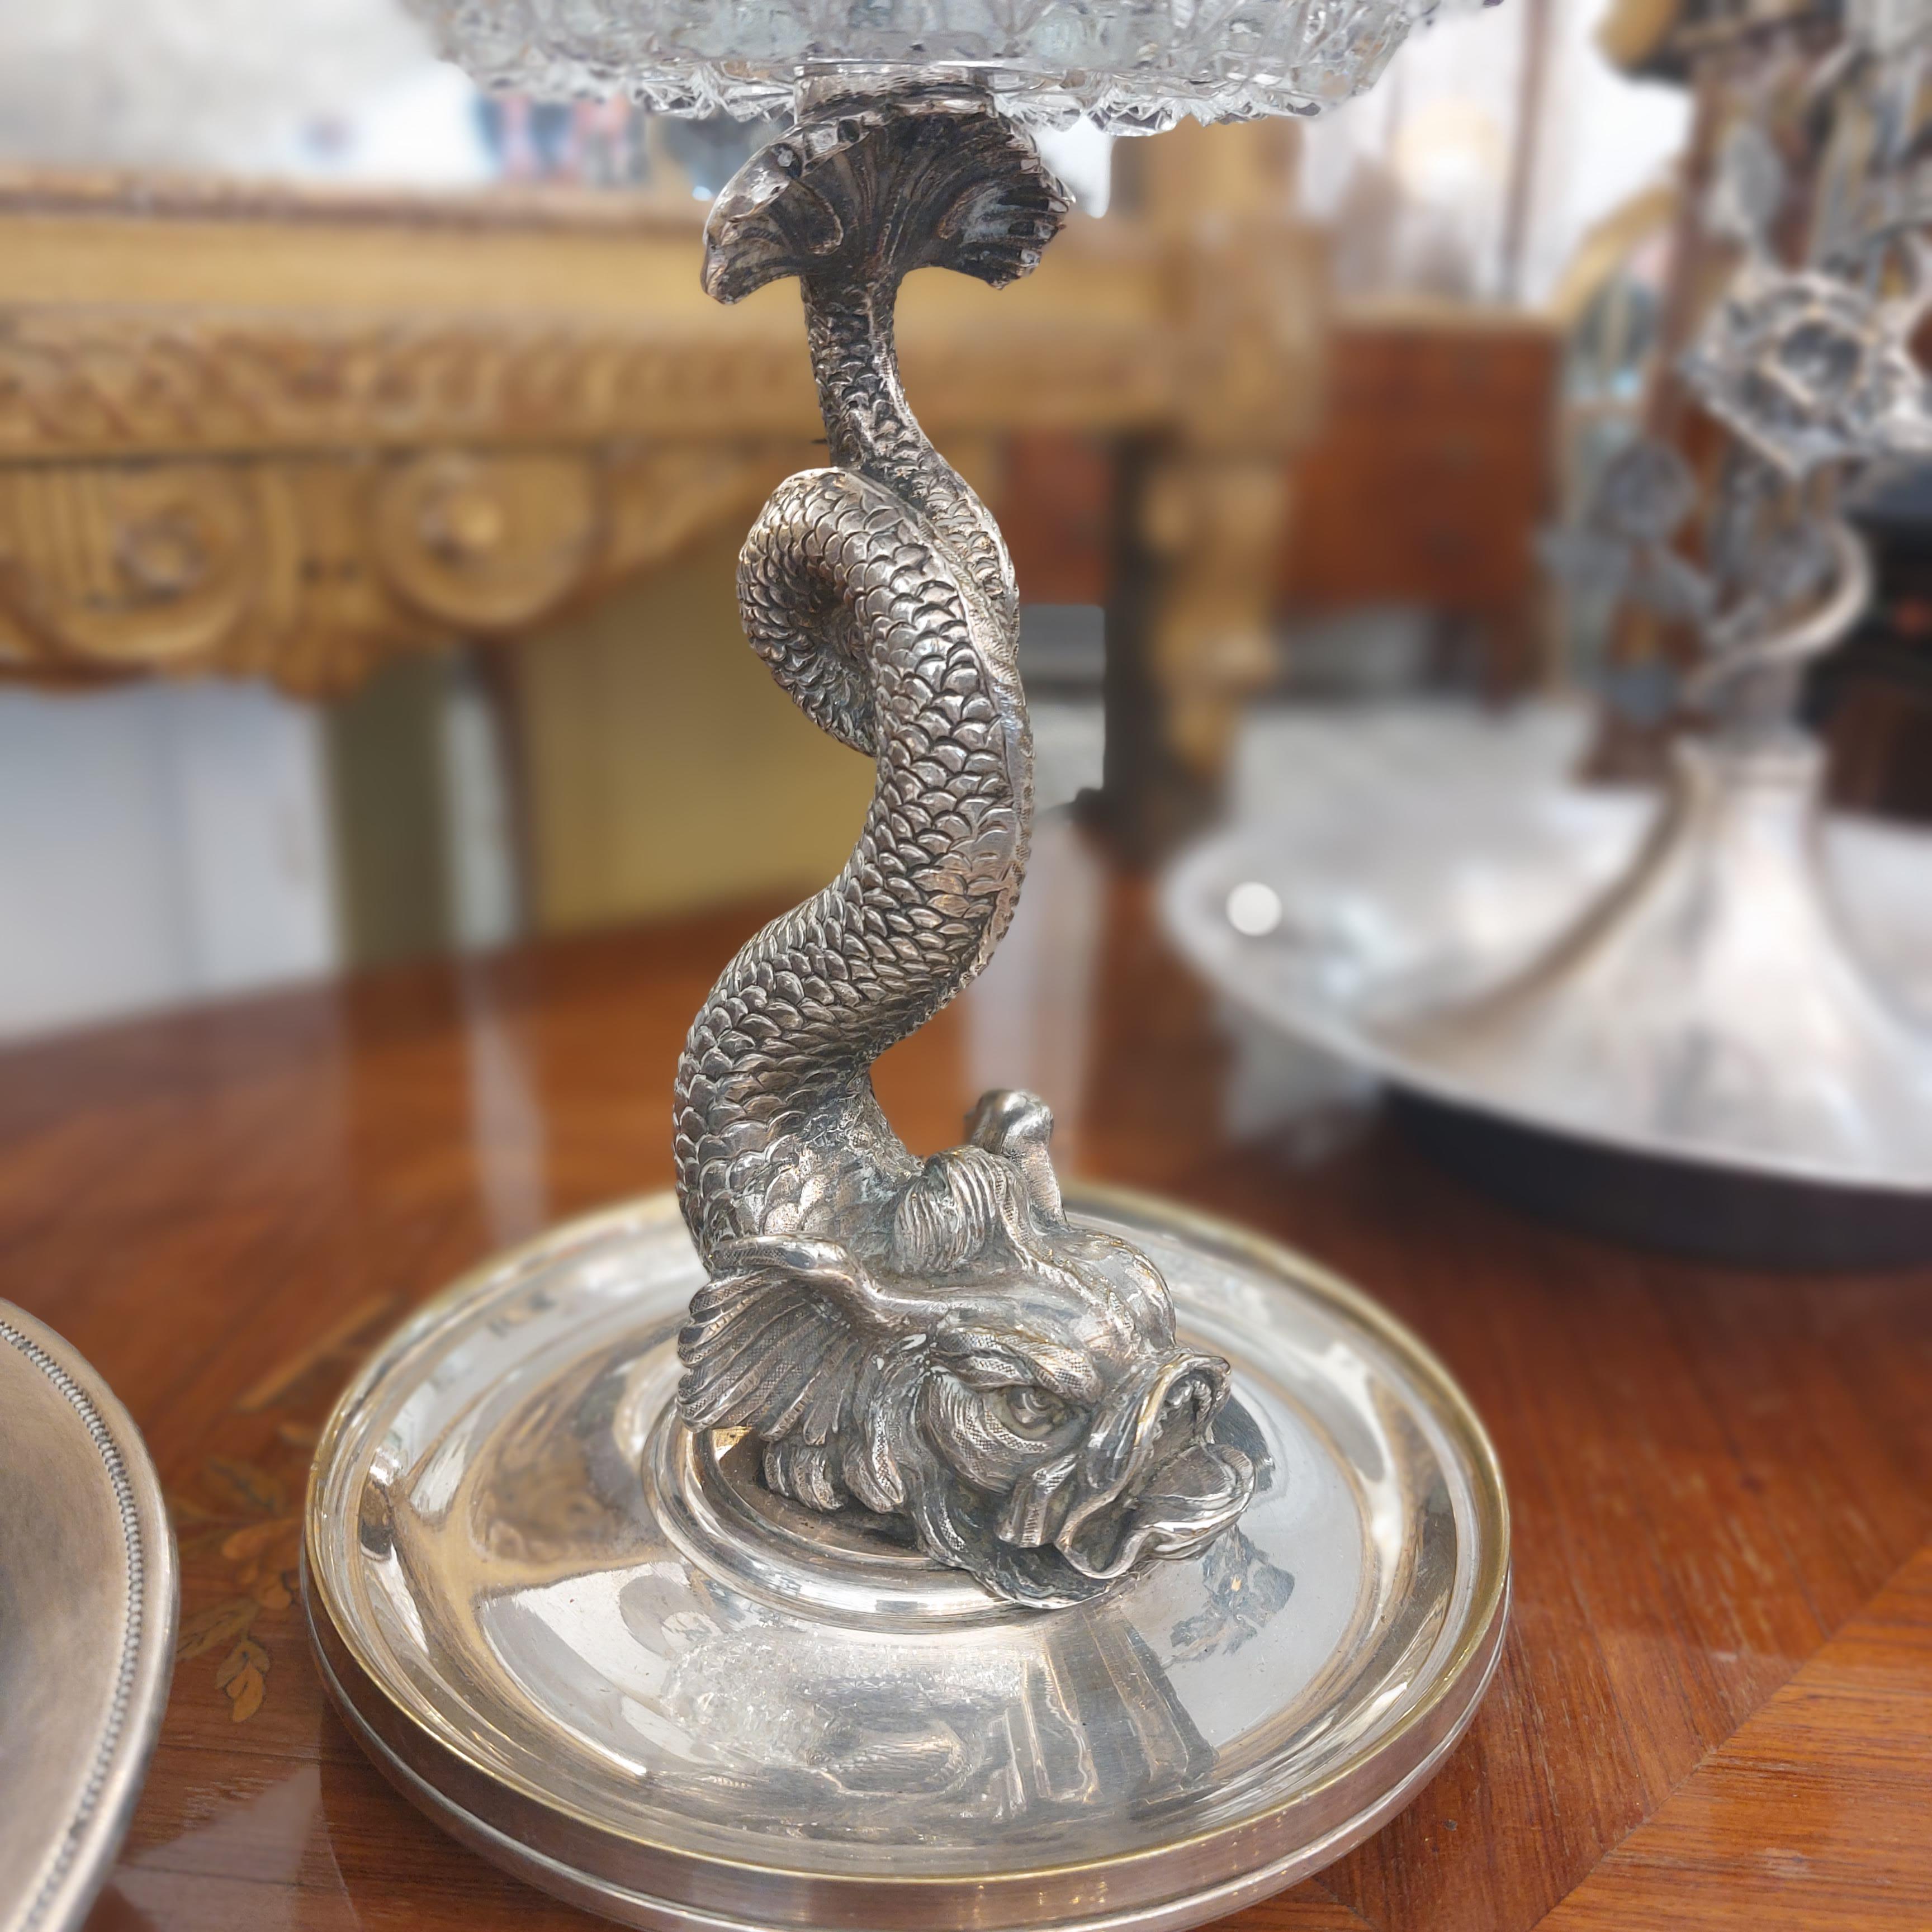 Silver Plate Crystal Cut Cup with Silver-Plated Chinese Dragon Fish Mount, 19th Century